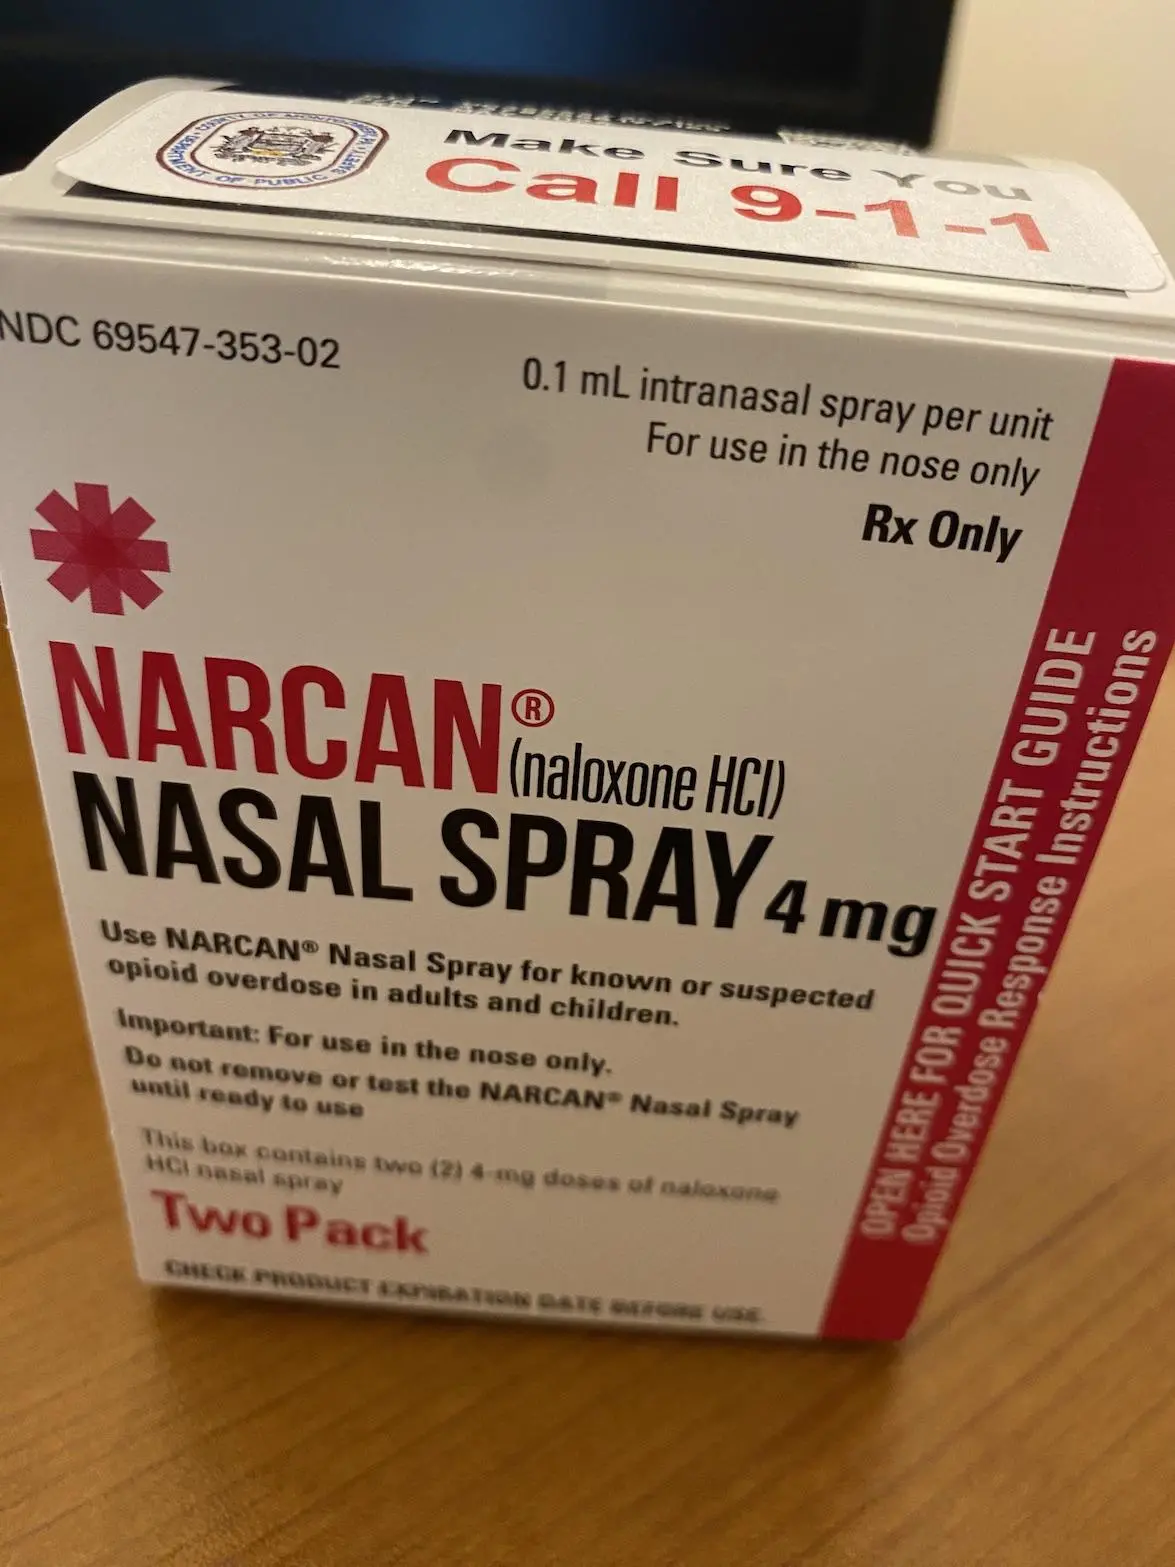 A two-pack of Narcan nasal spray